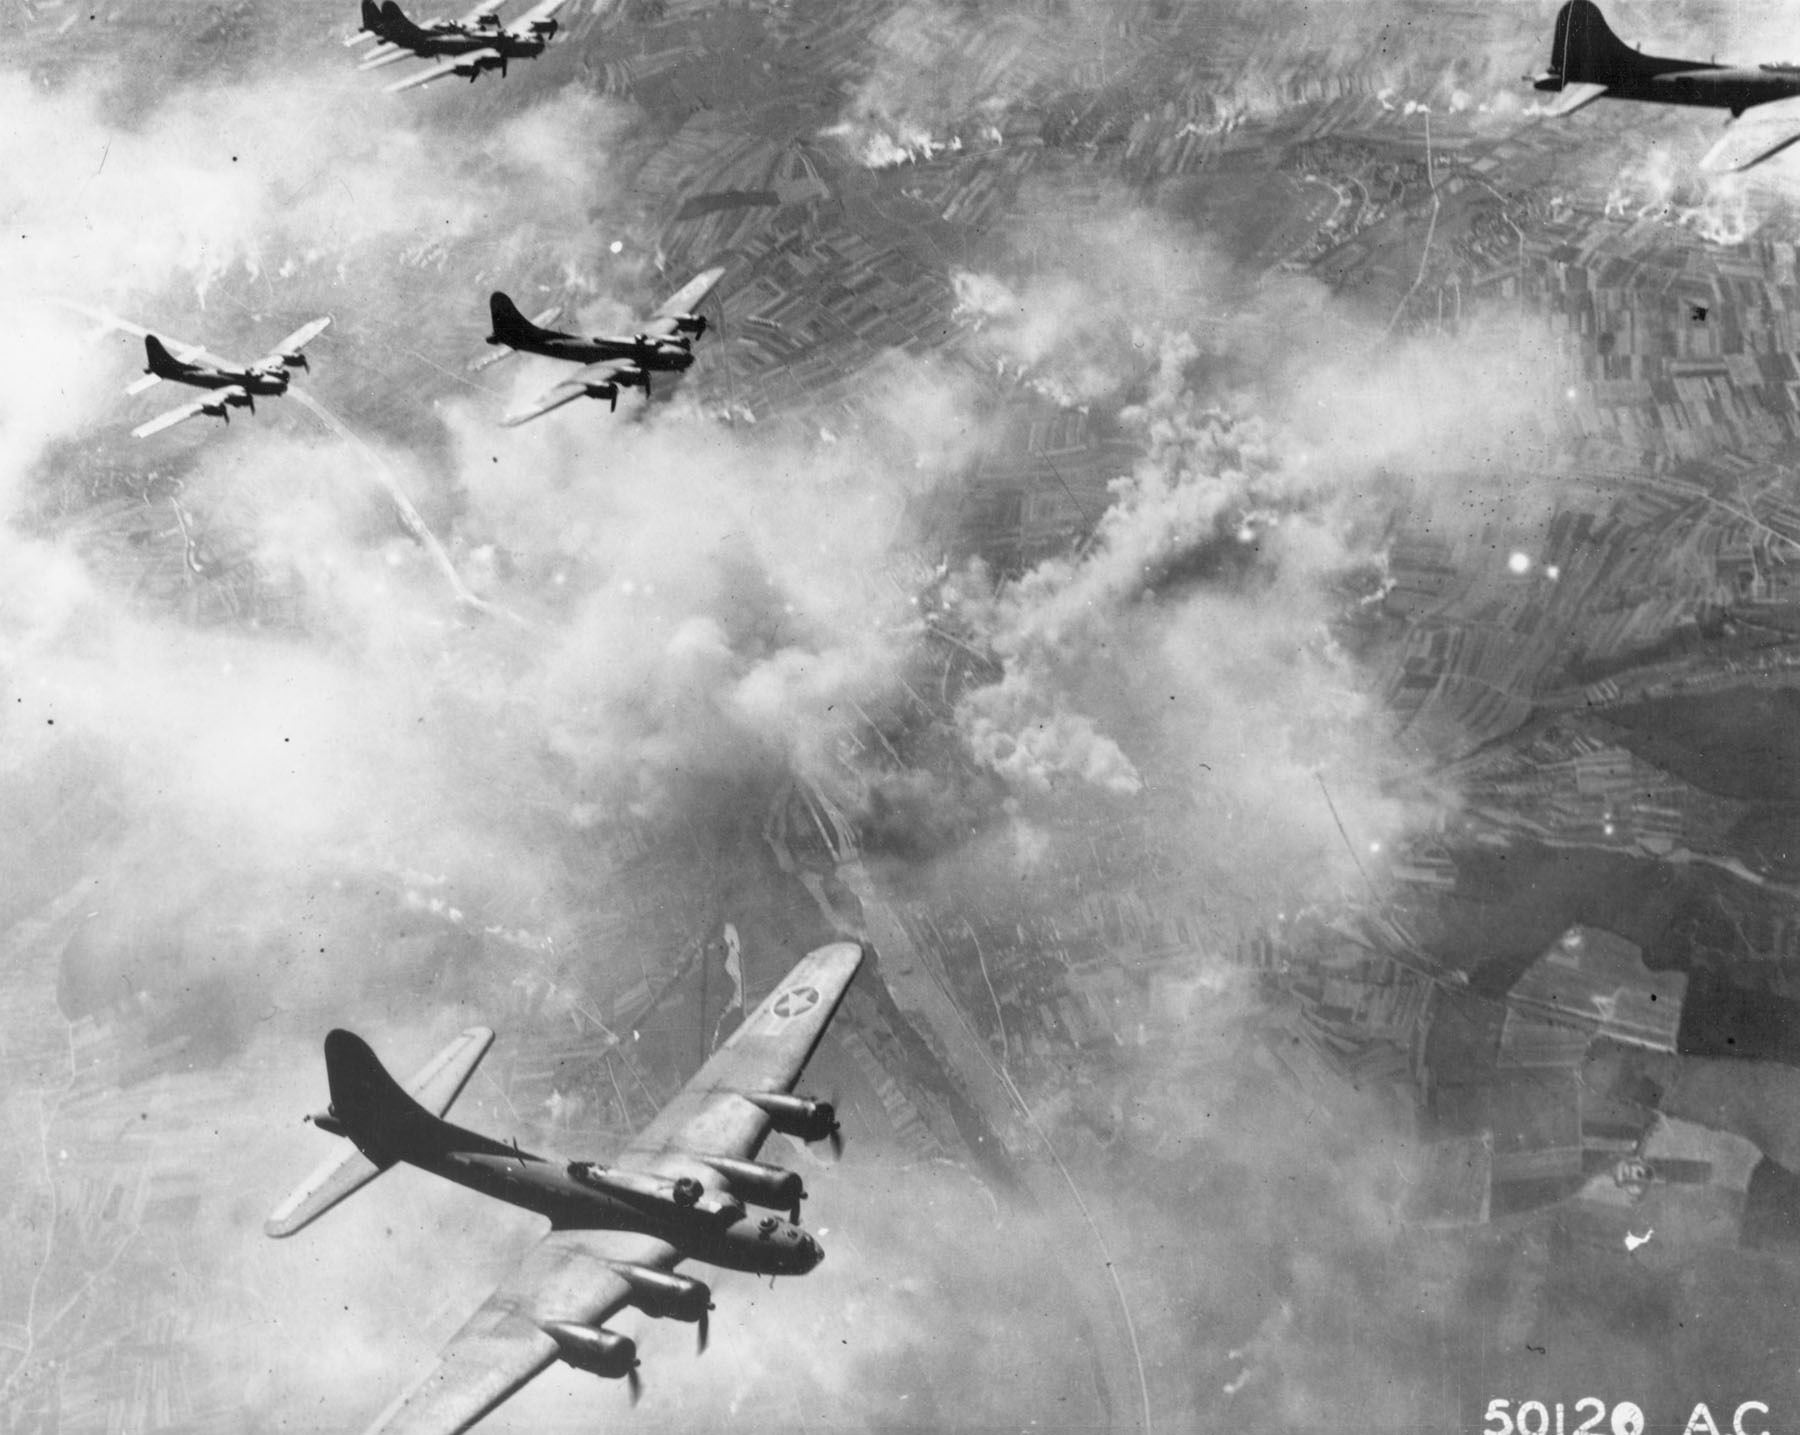 B-17F Flying Fortress bombers in flight over Schweinfurt, Germany, 17 Aug 1943